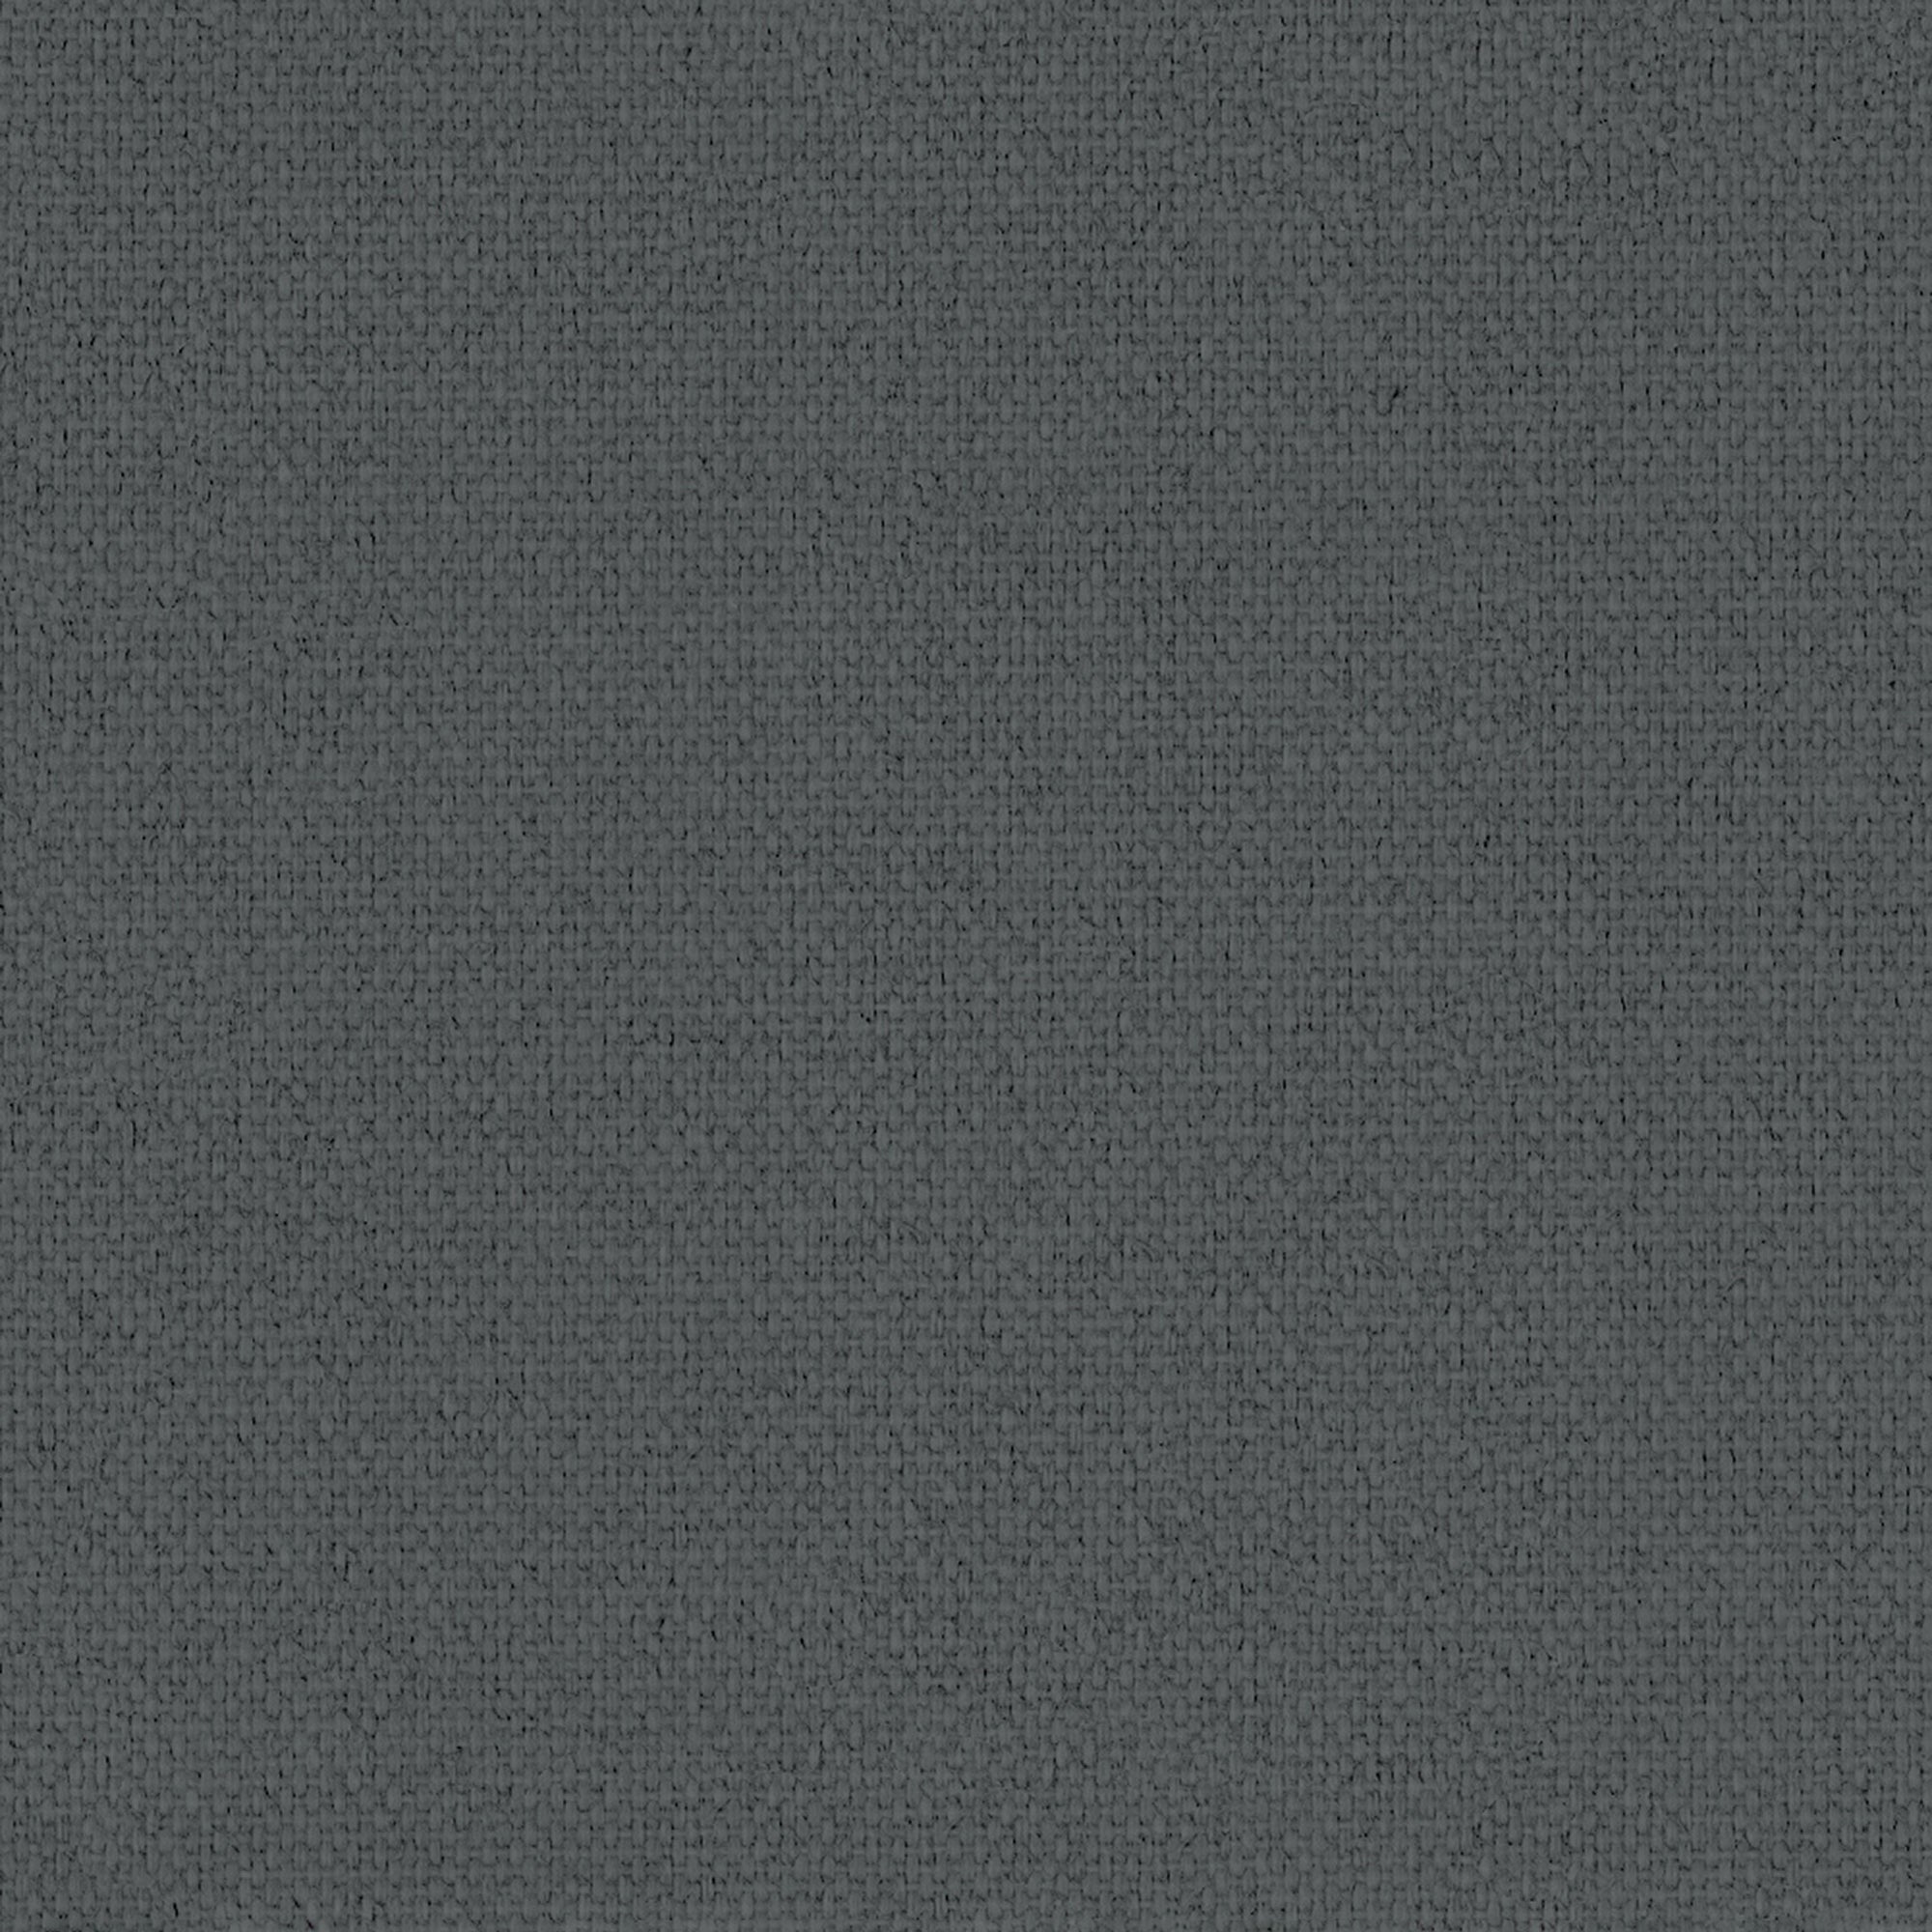 Iona Daylight Made to Measure Flame Retardant Roller Blind Fabric Sample Iona Charcoal